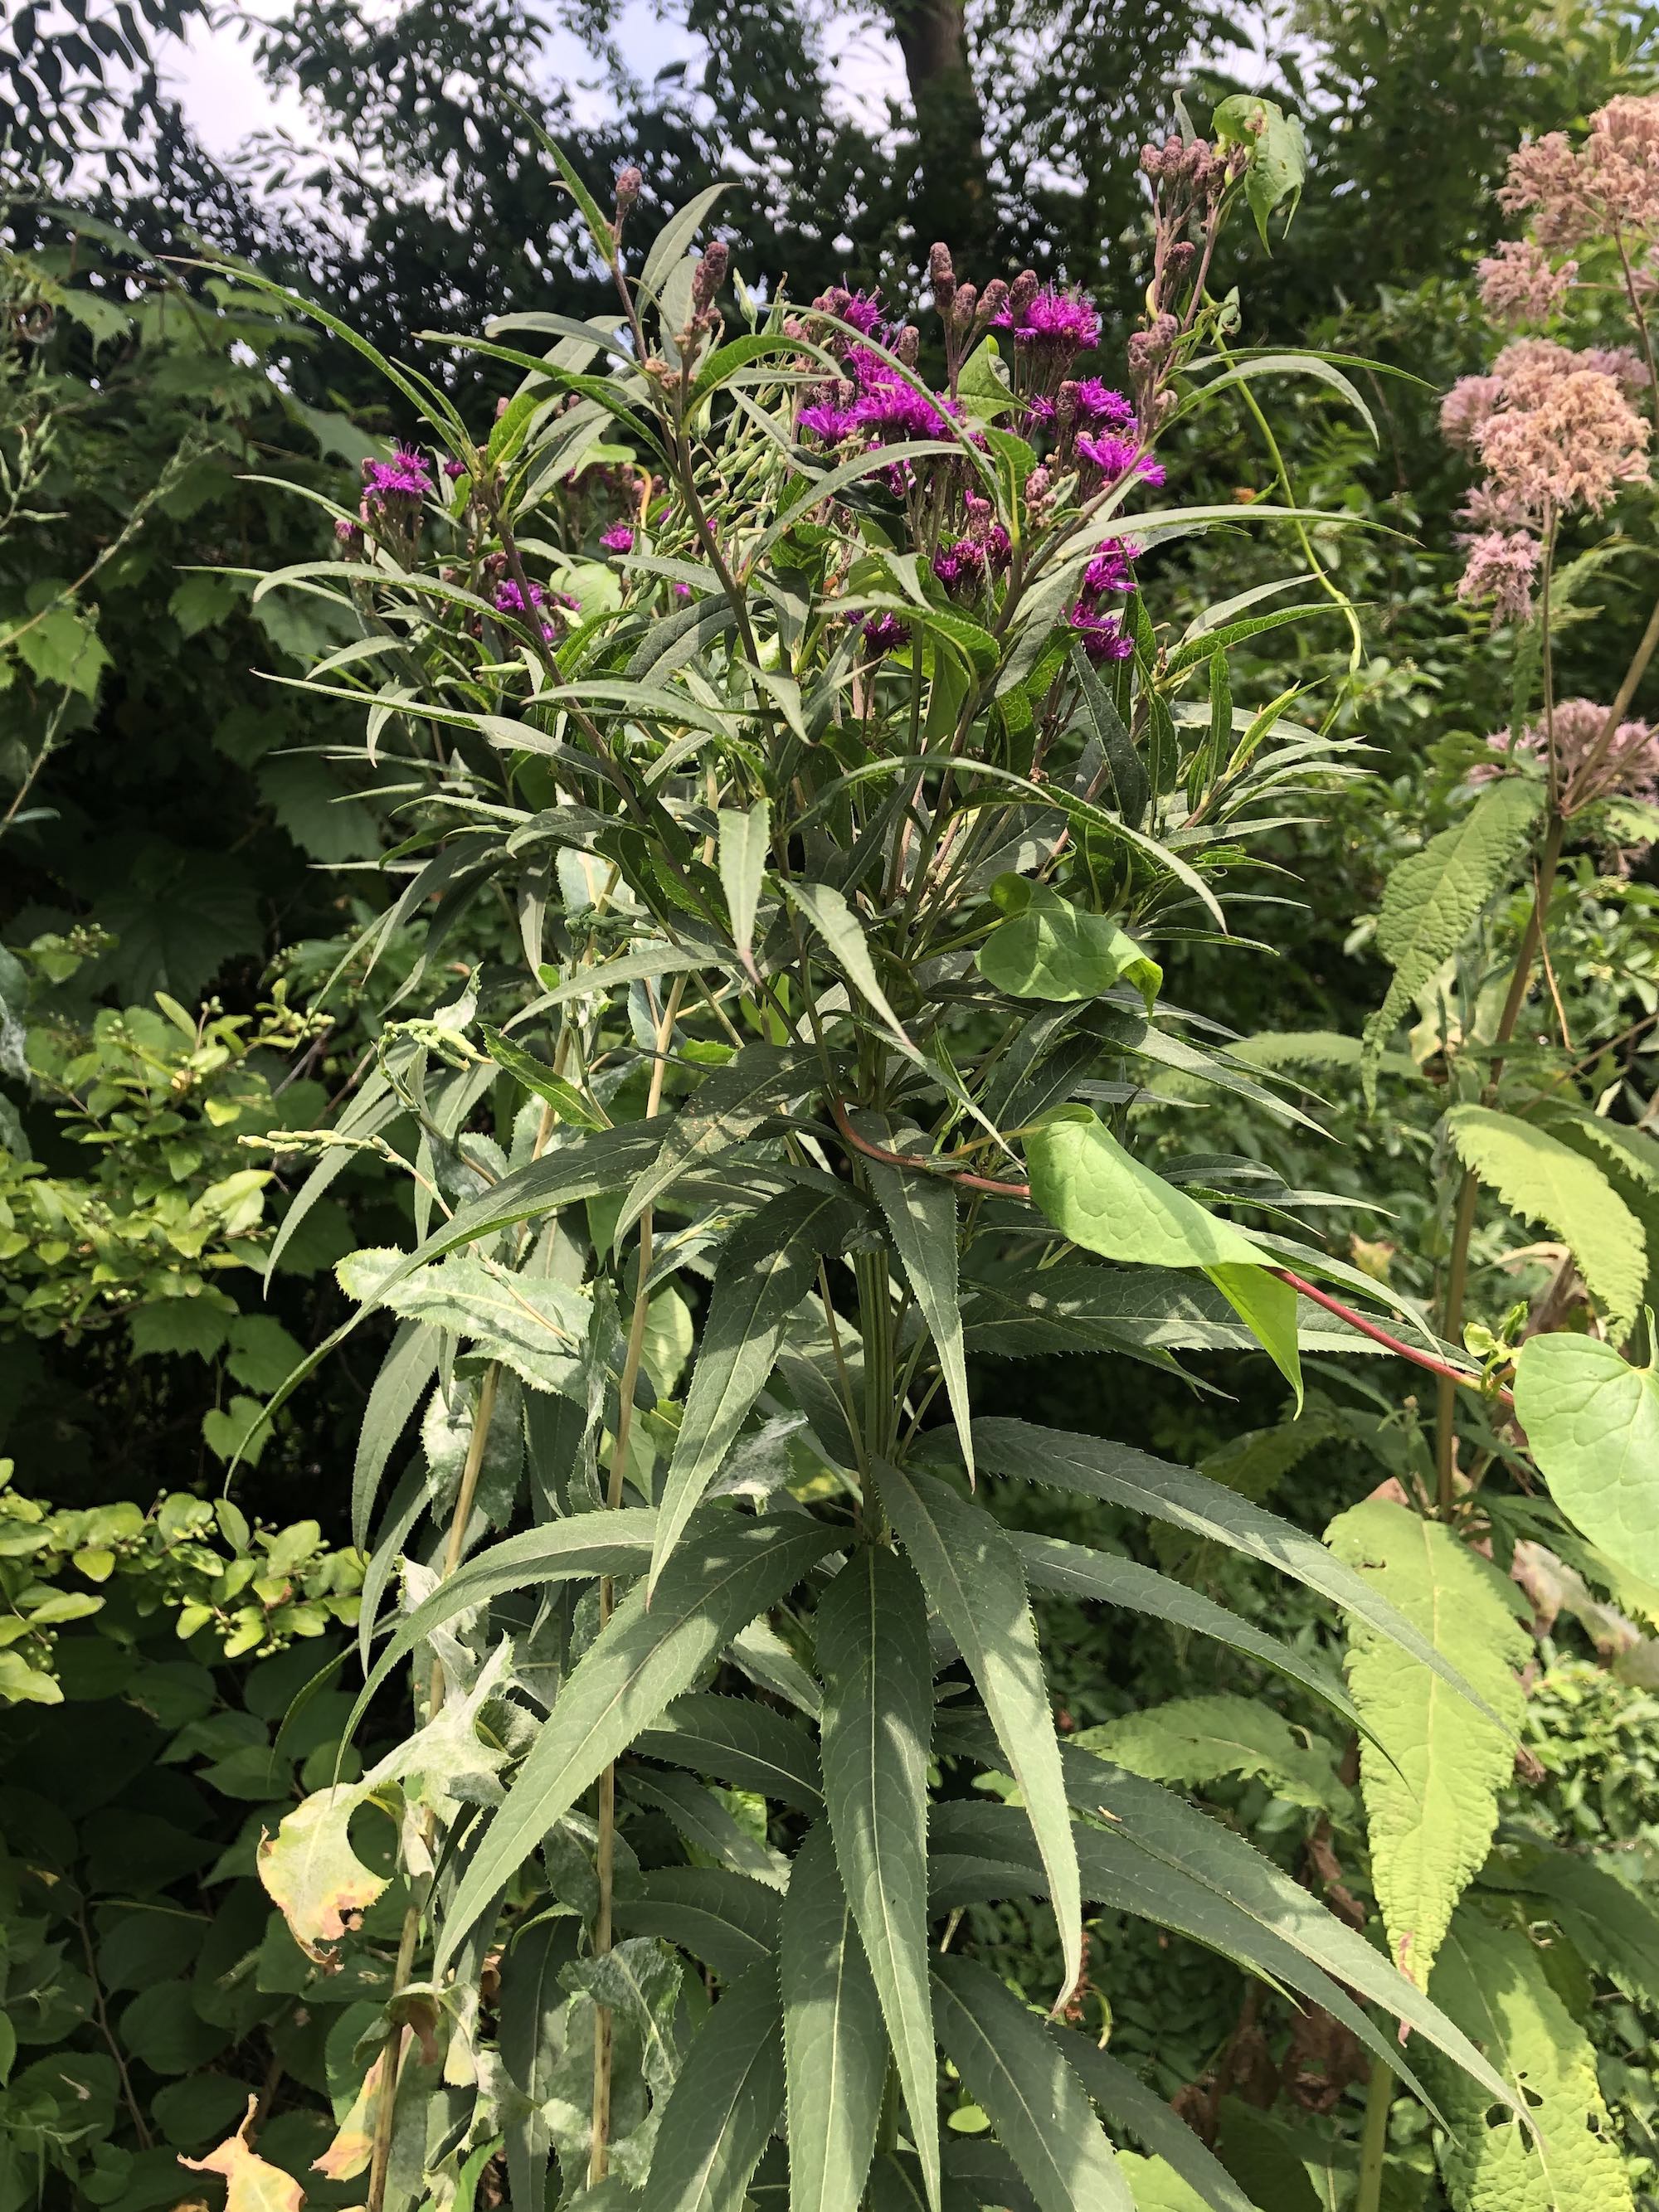 Common Ironweed along bikepath behind Gregory Street in Madison, Wisconsin on August 2, 2021.